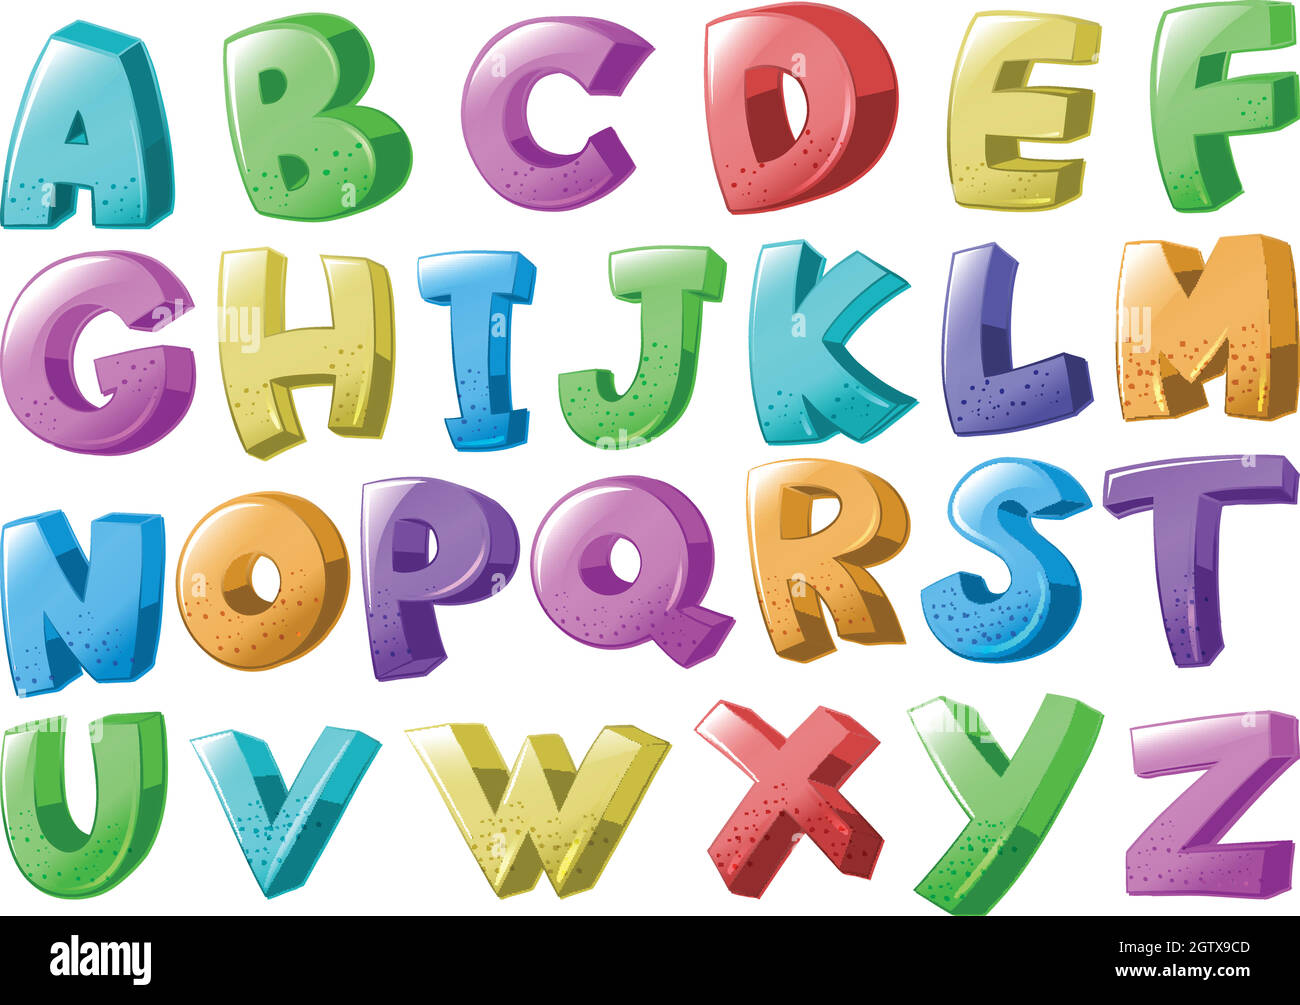 Font design with english alphabets Stock Vector